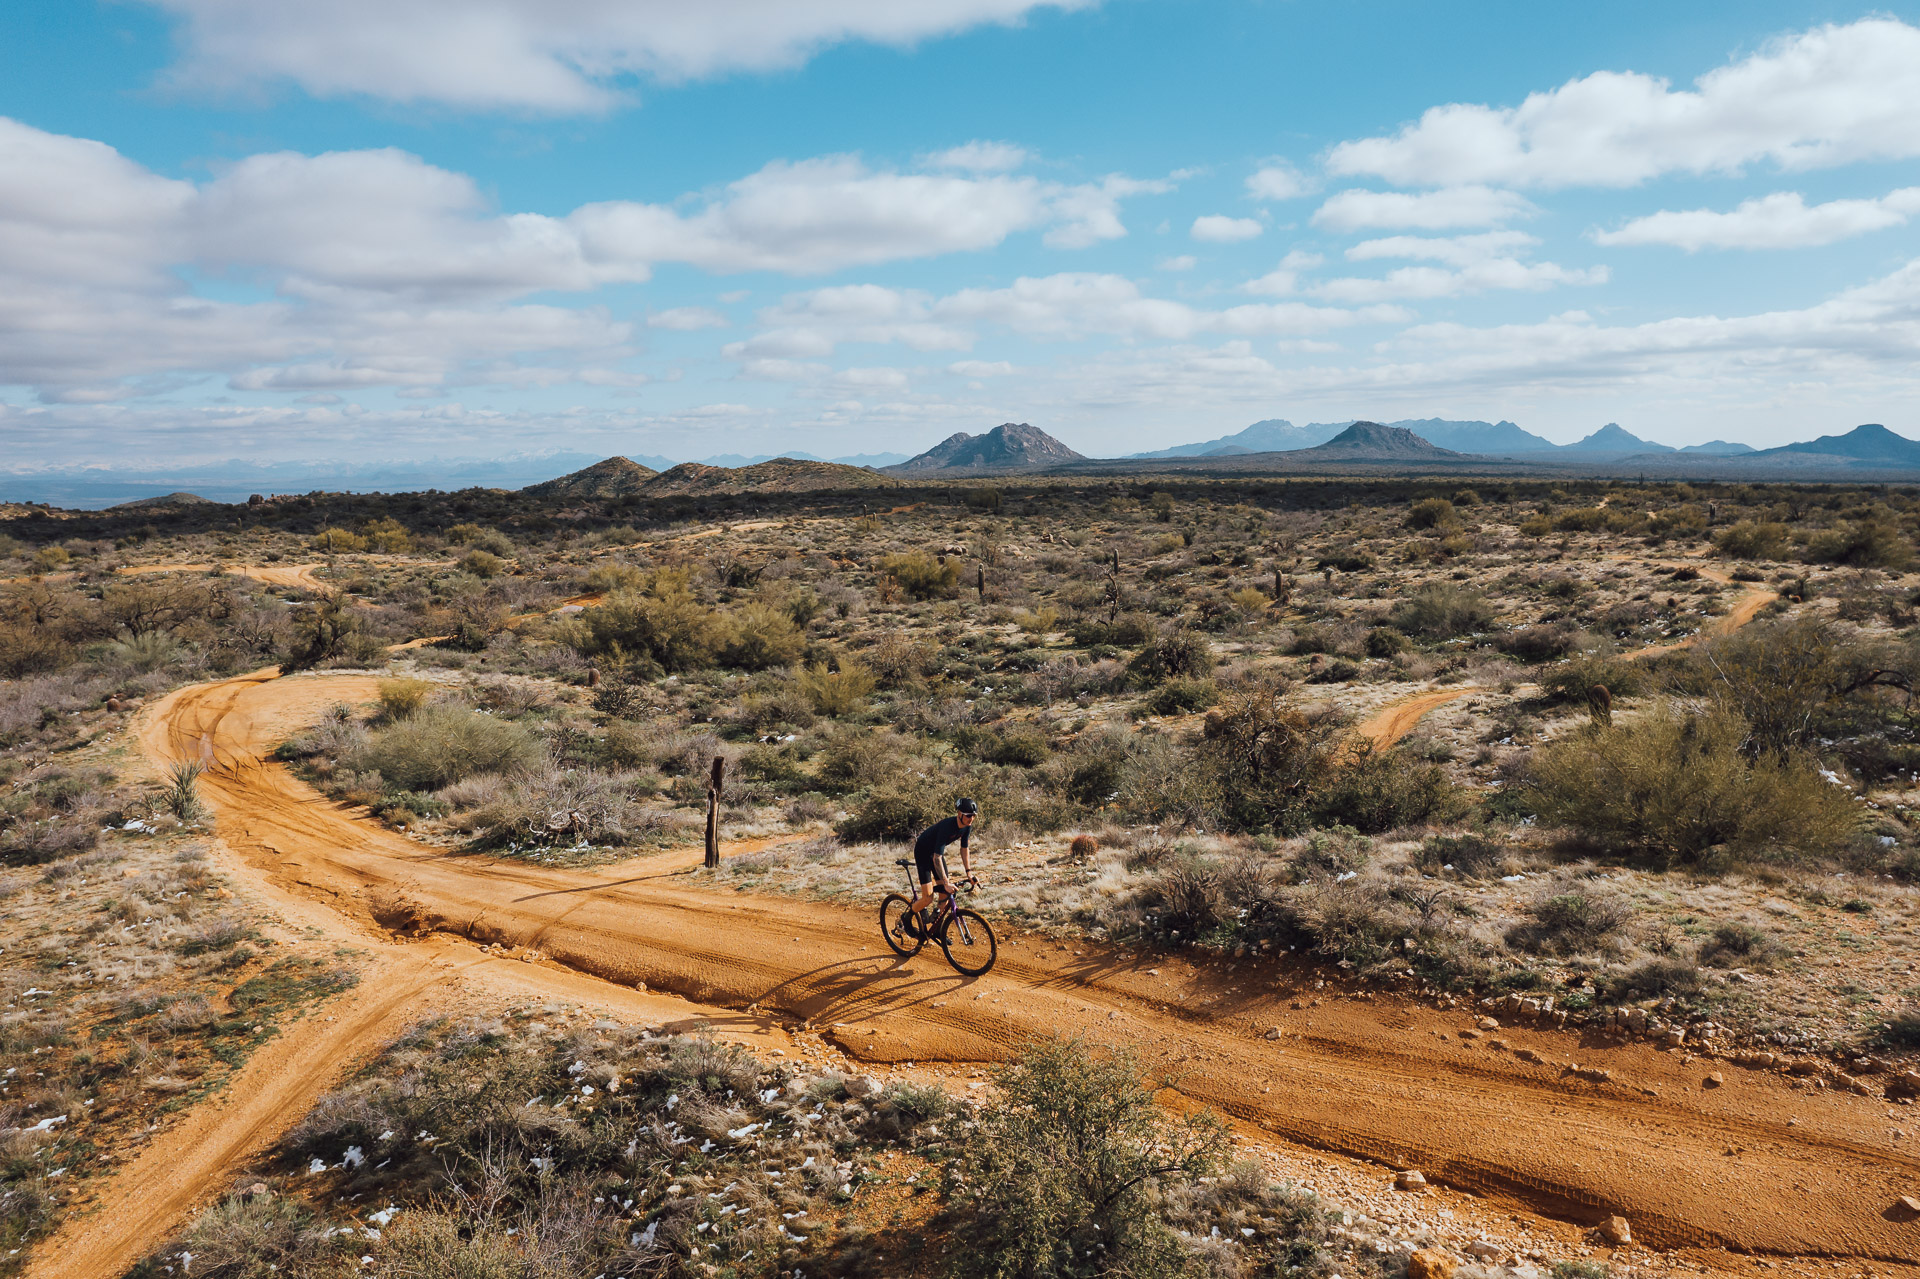 Sam Andrews cycling on a dusty red dirt path through the Arizona desert